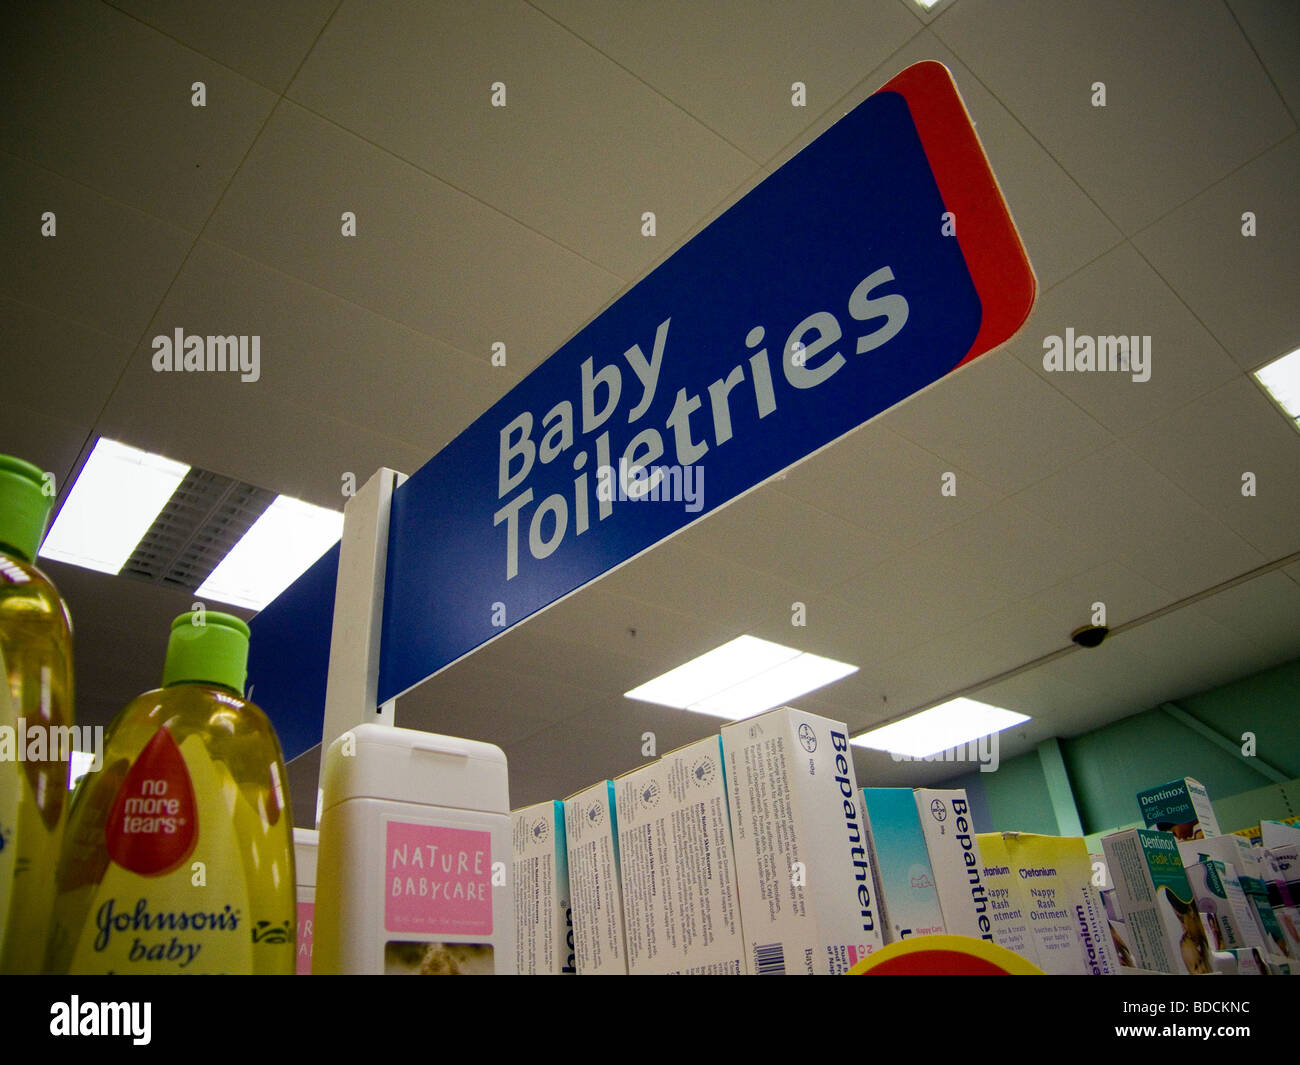 An Isle sign in a store - Baby Toiletries Stock Photo